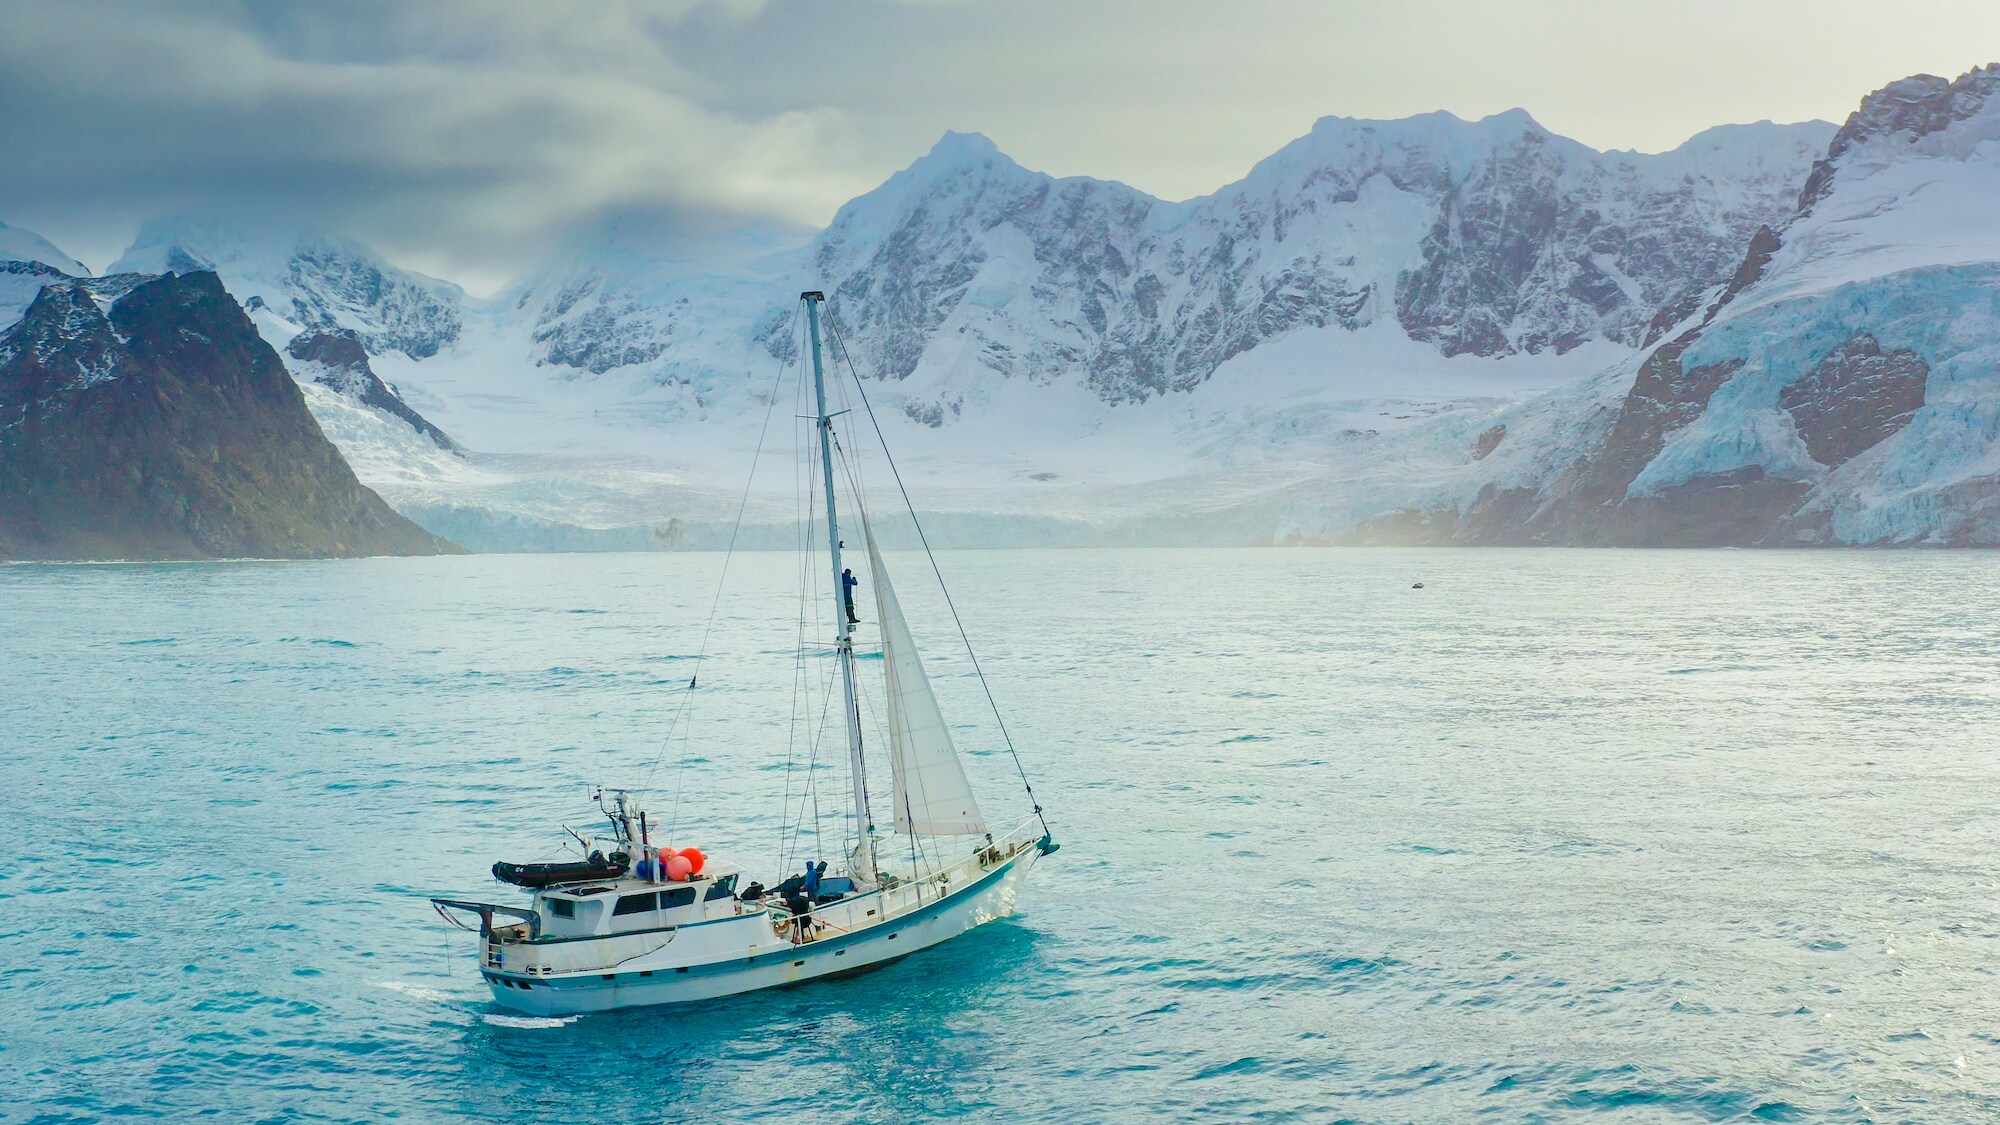 Research and filming yacht, Australis. (Credit: National Geographic/Bertie Gregory for Disney+)